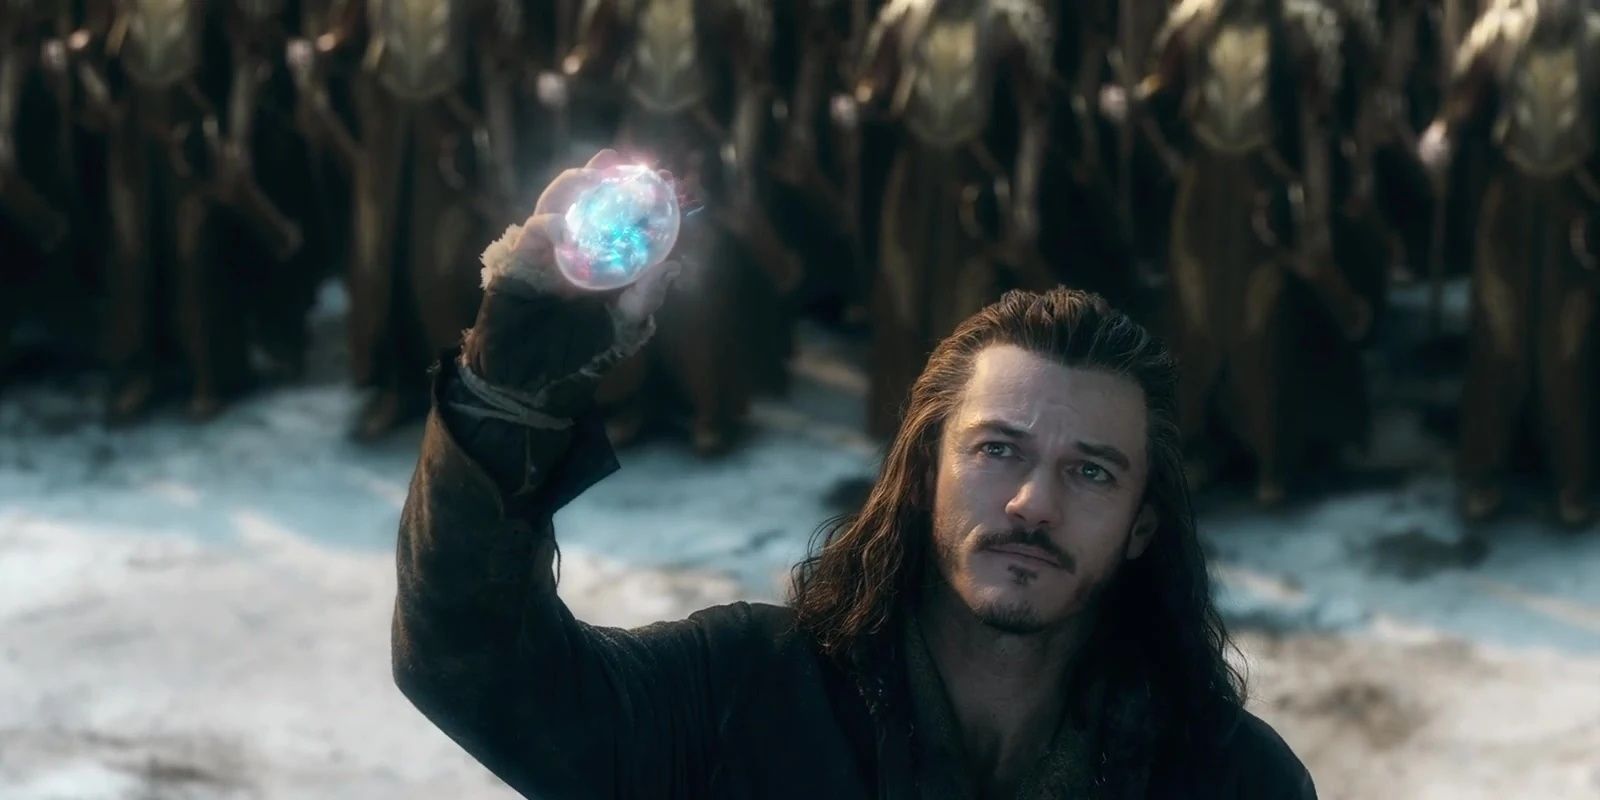 bard the bowman and arkenstone